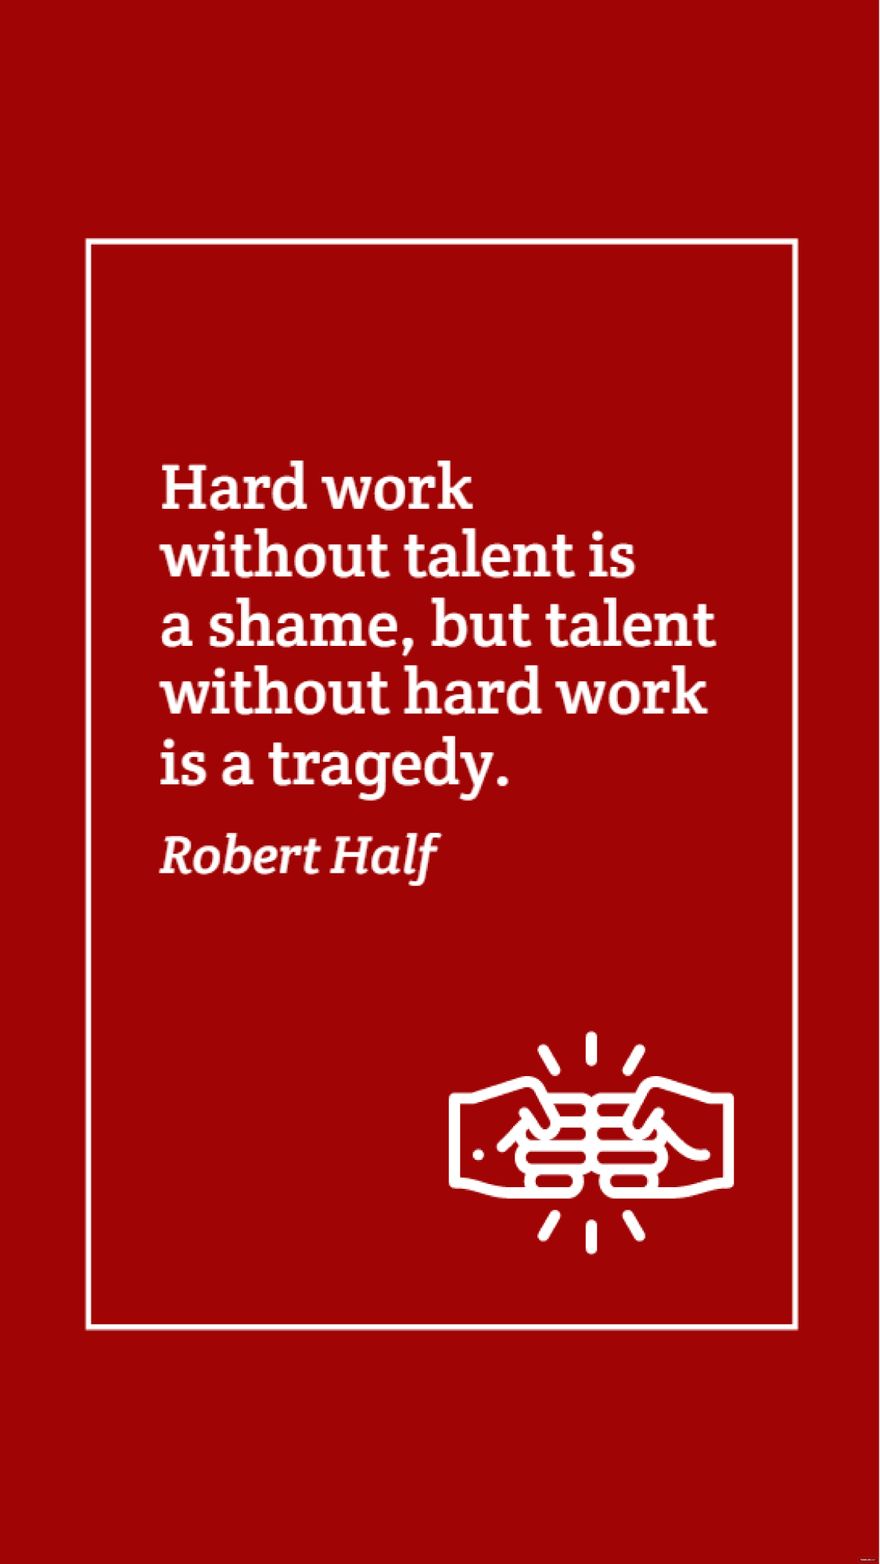 Free Robert Half - Hard work without talent is a shame, but talent without hard work is a tragedy. in JPG